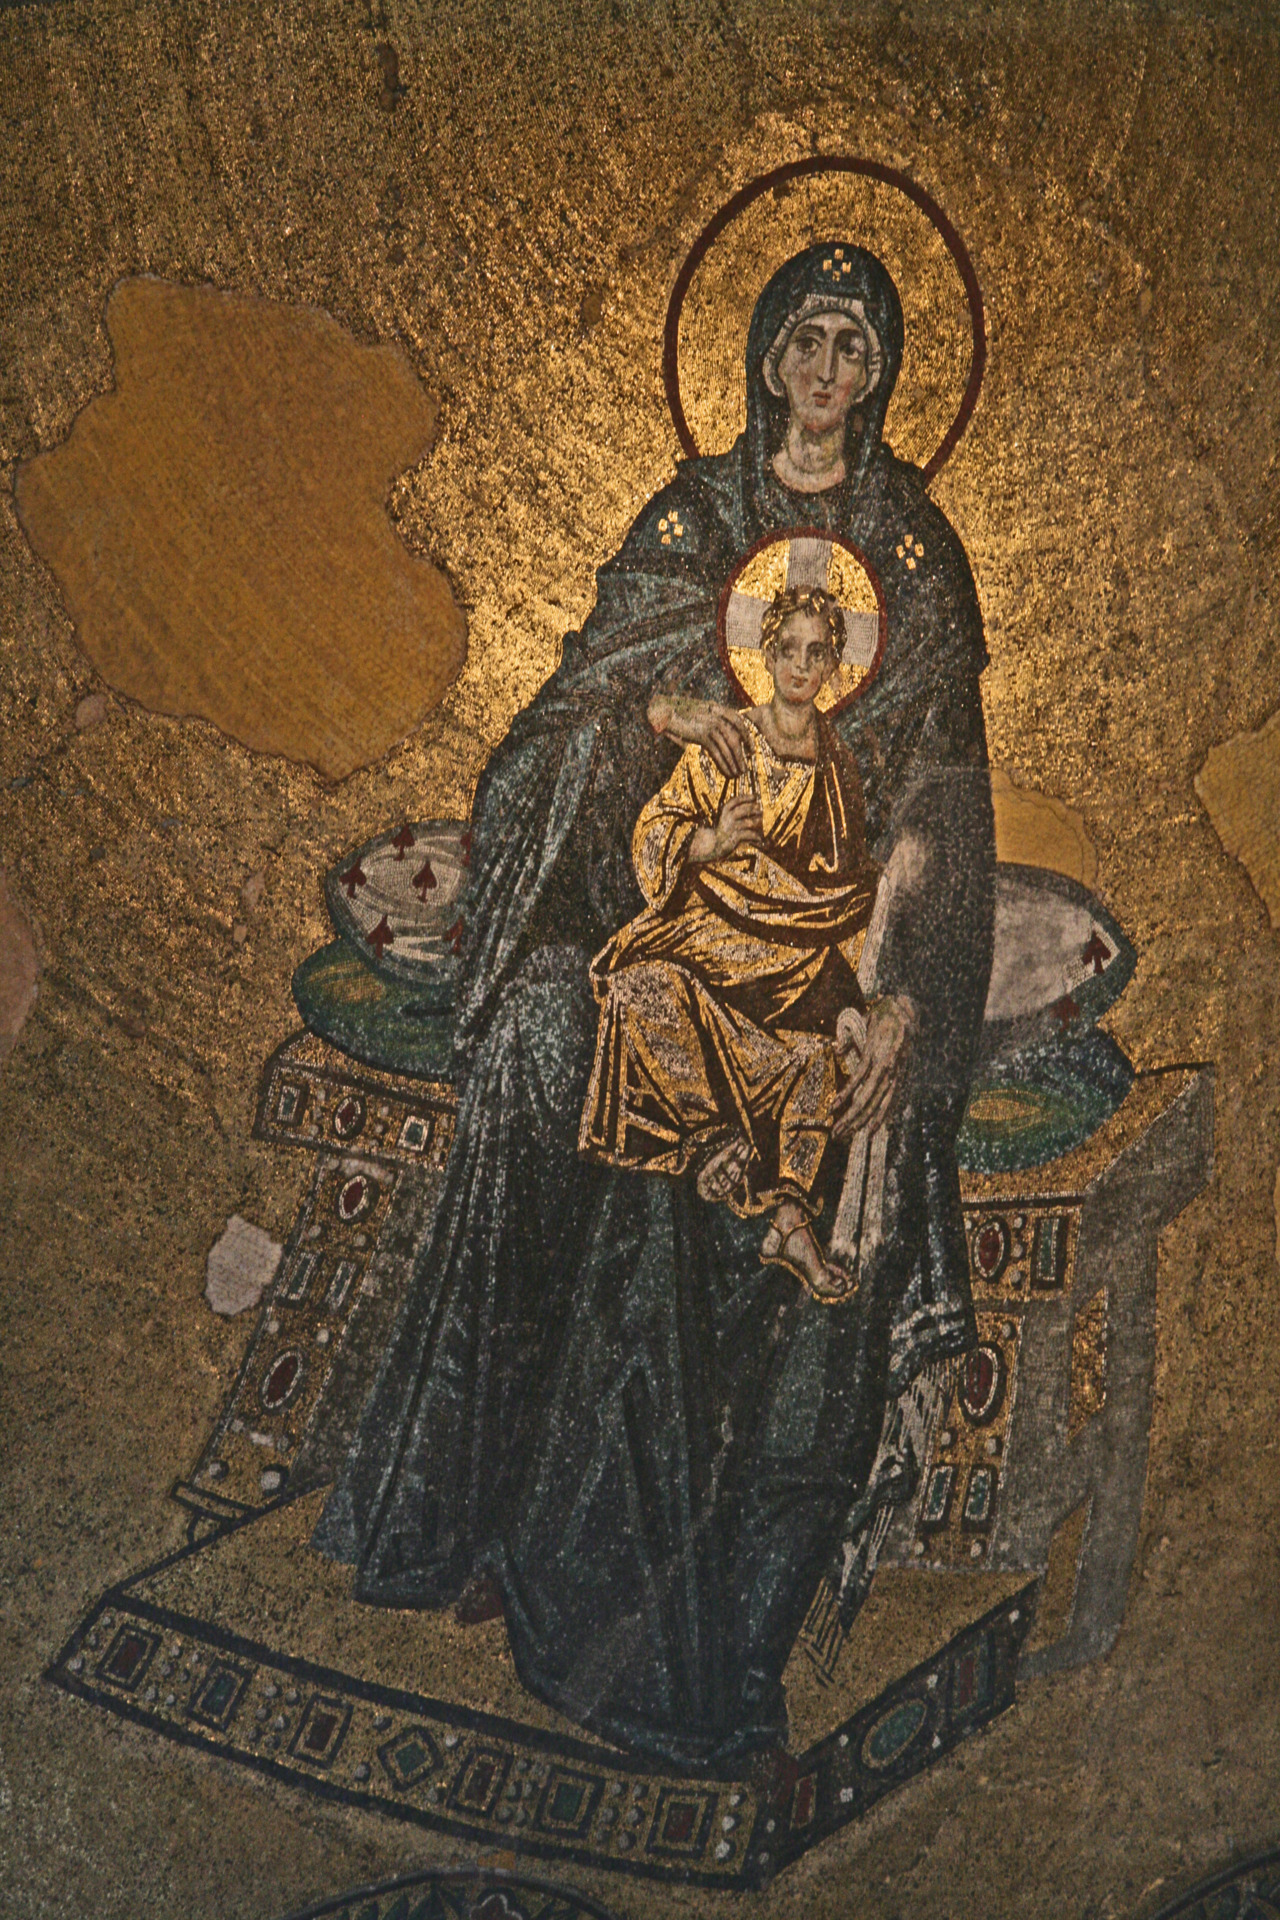 “Theotokos enthronos” and the Child Jesus; Virgin Mary depicted sitting in a